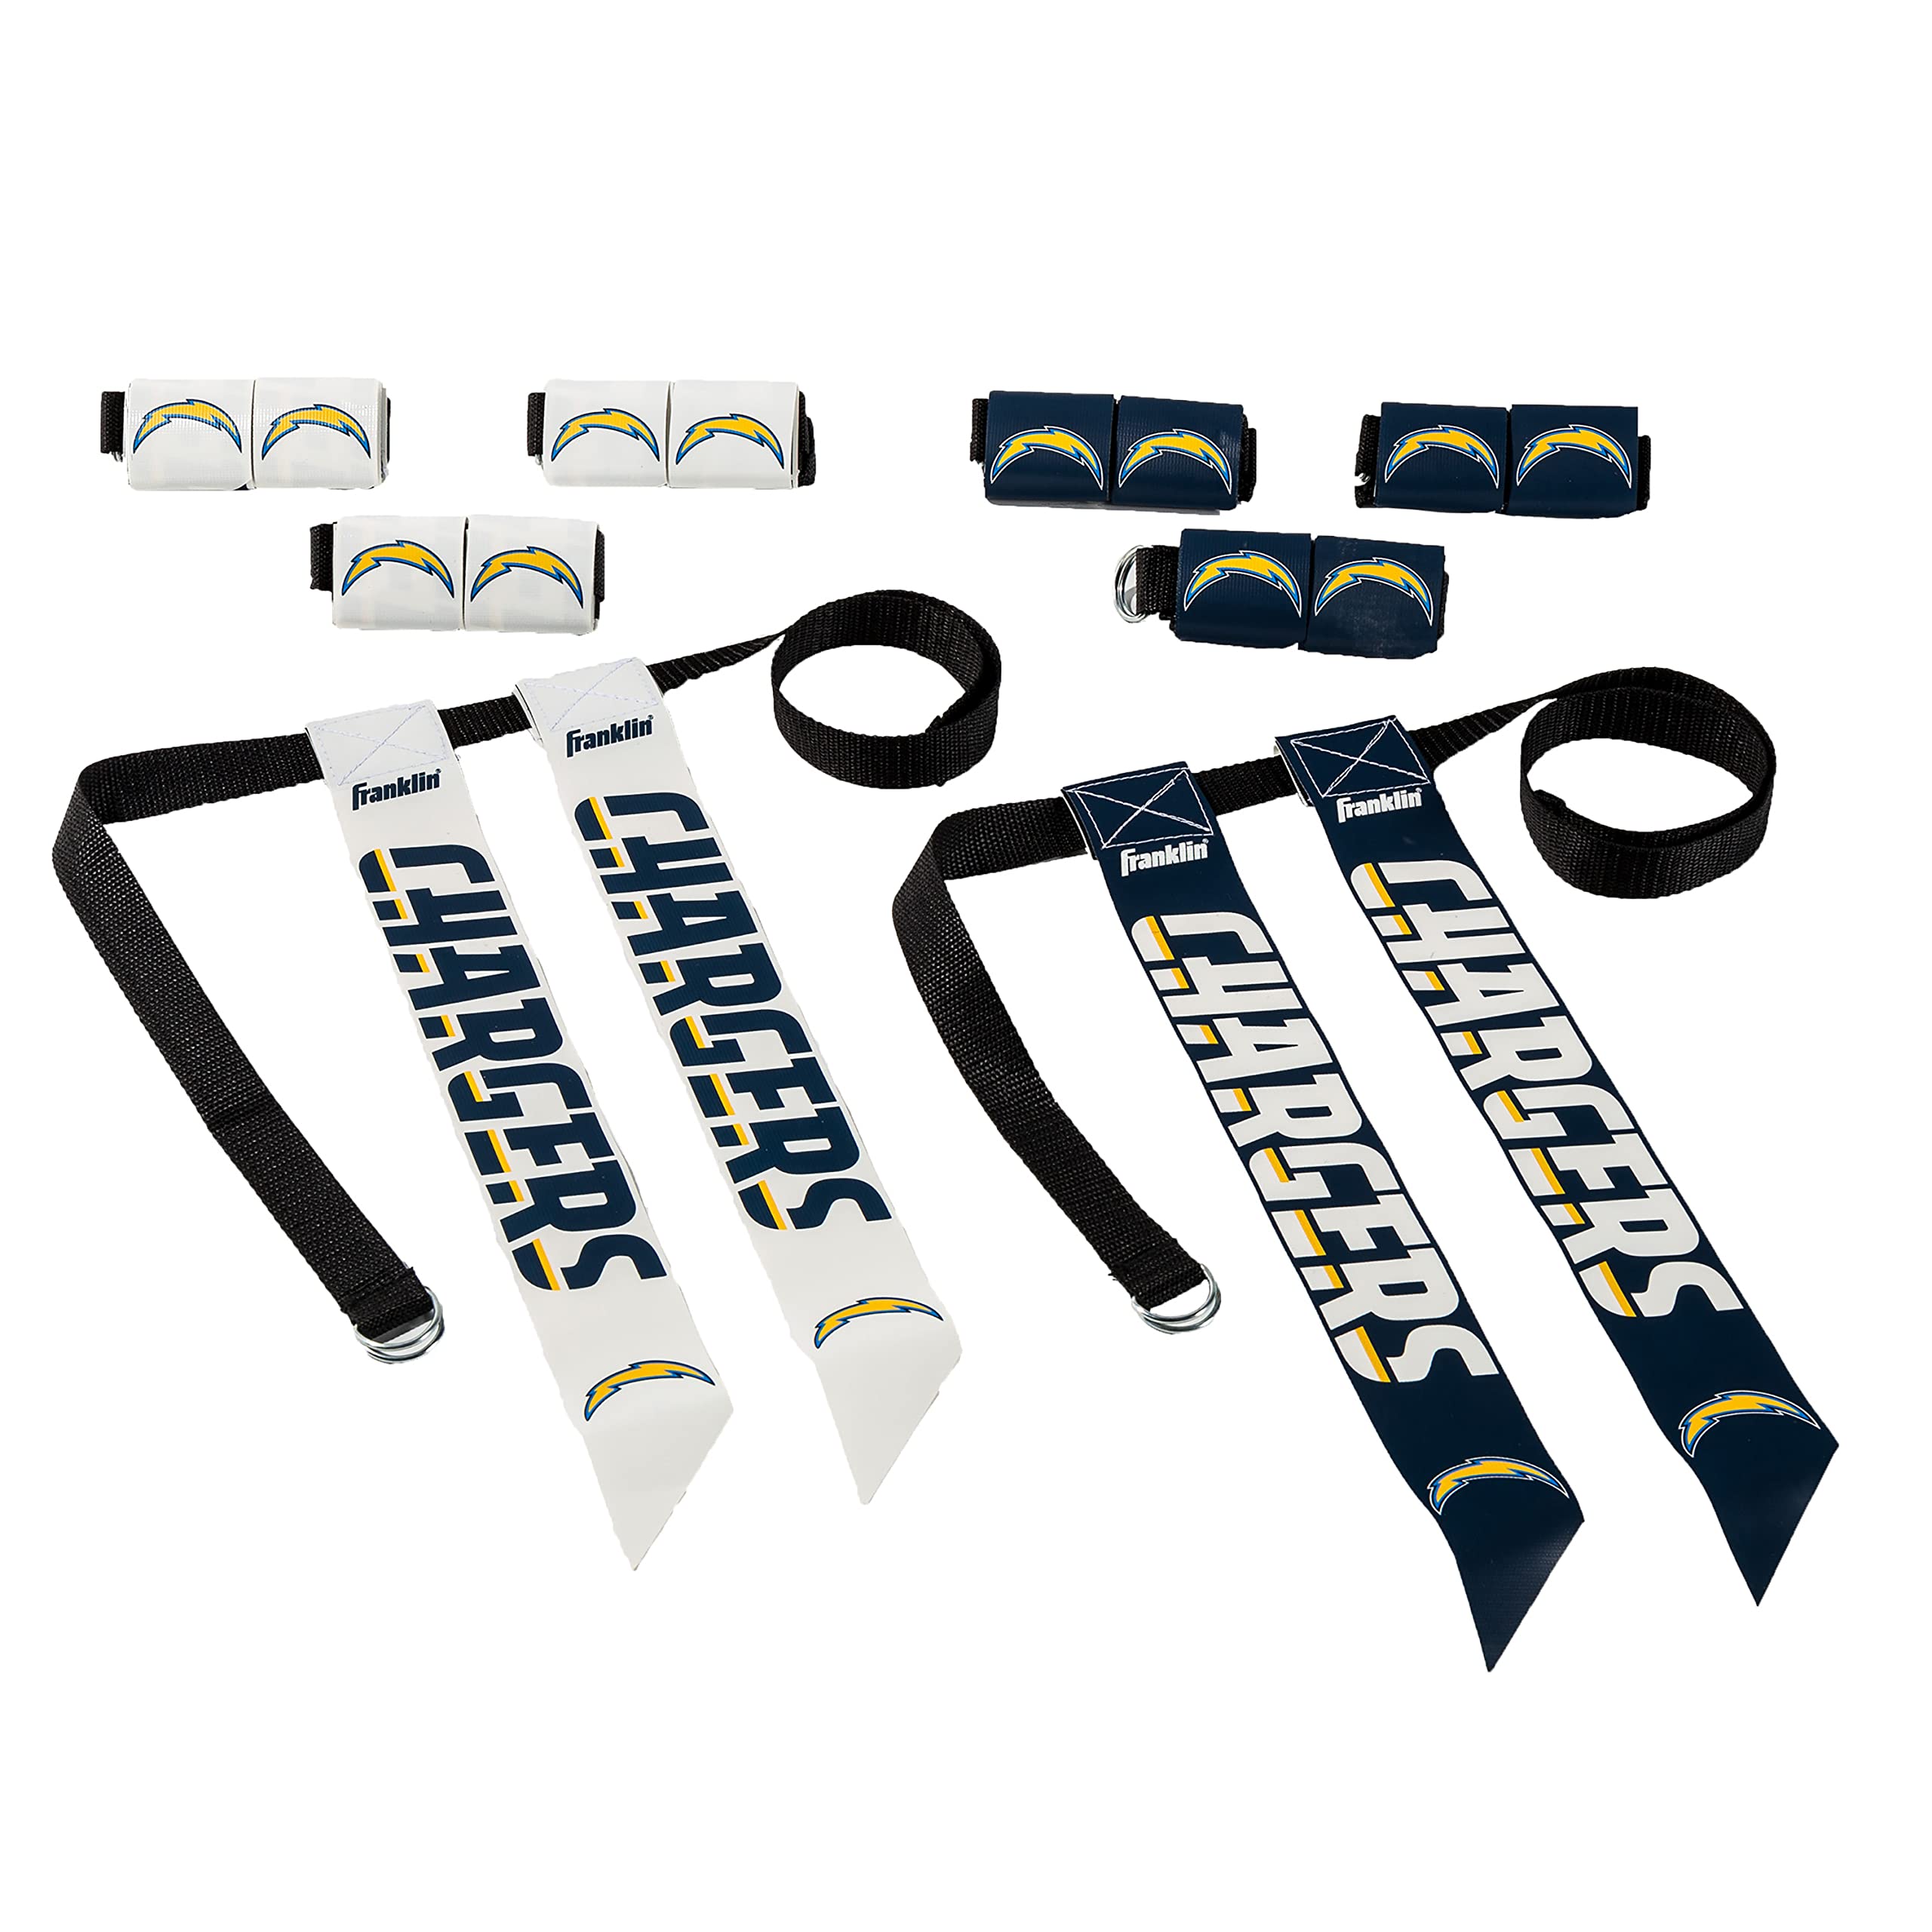 Franklin Sports Nfl Los Angeles Chargers Flag Football Sets - Nfl Team Flag Football Belts And Flags - Flag Football Equipment F